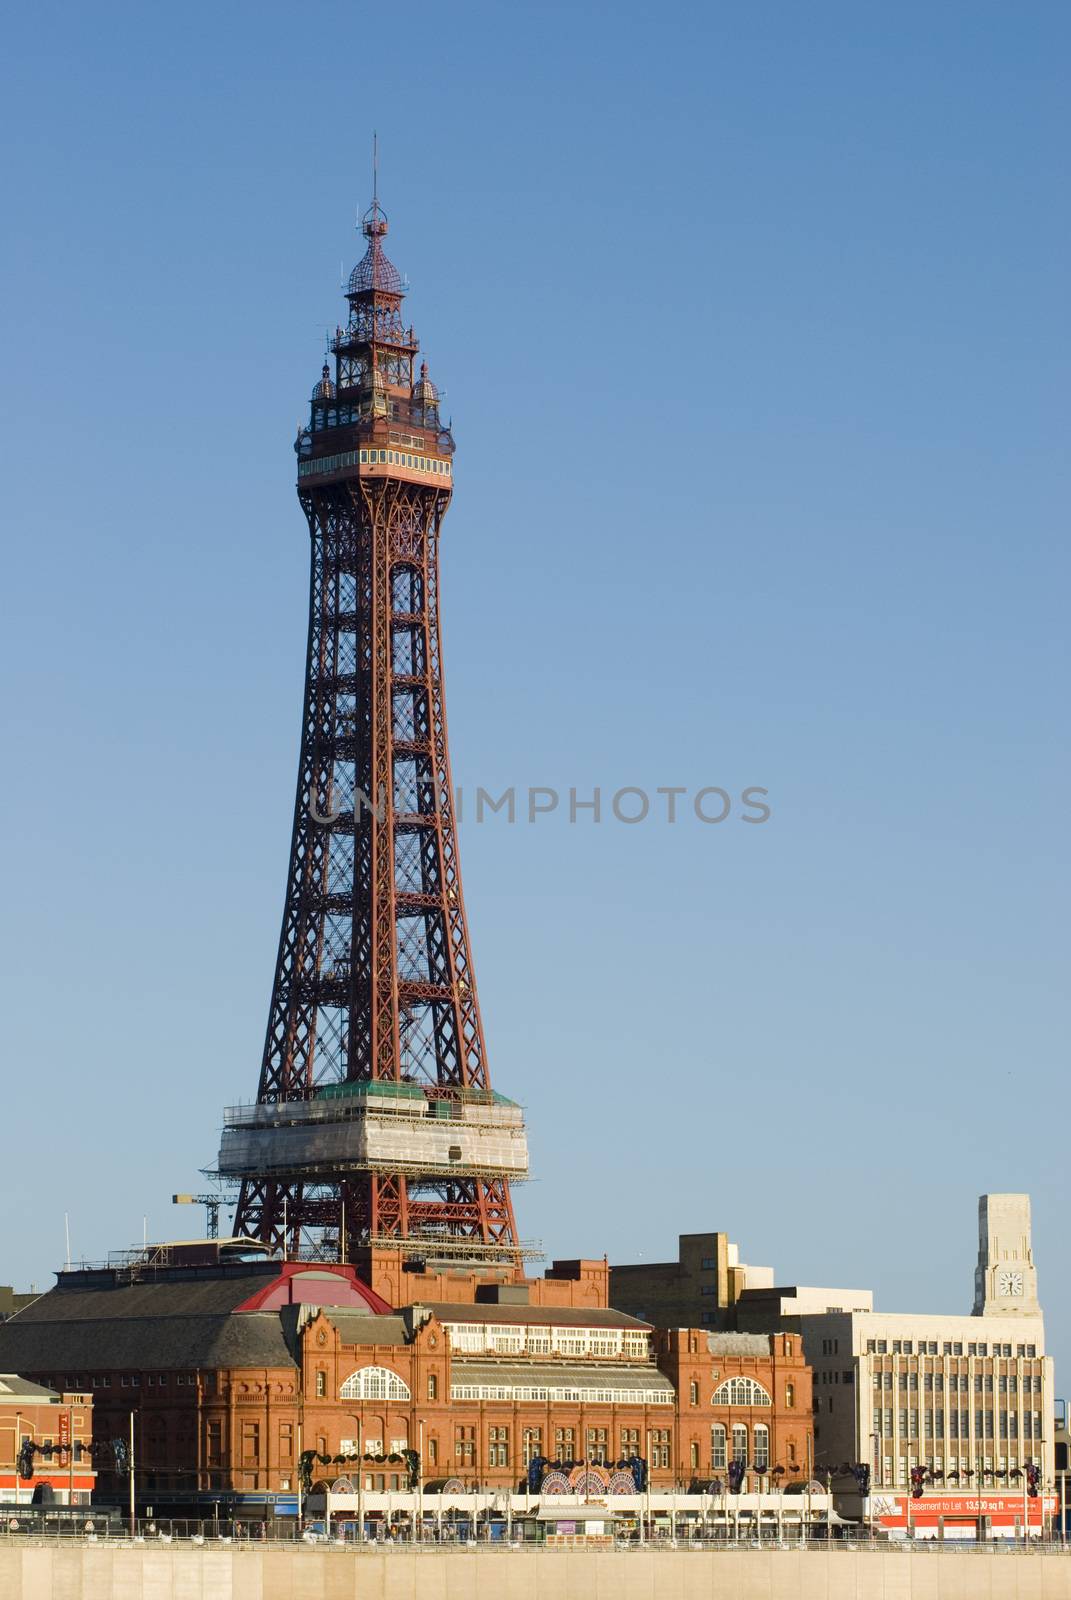 Blackpool Tower, Blackpool, England by stockarch